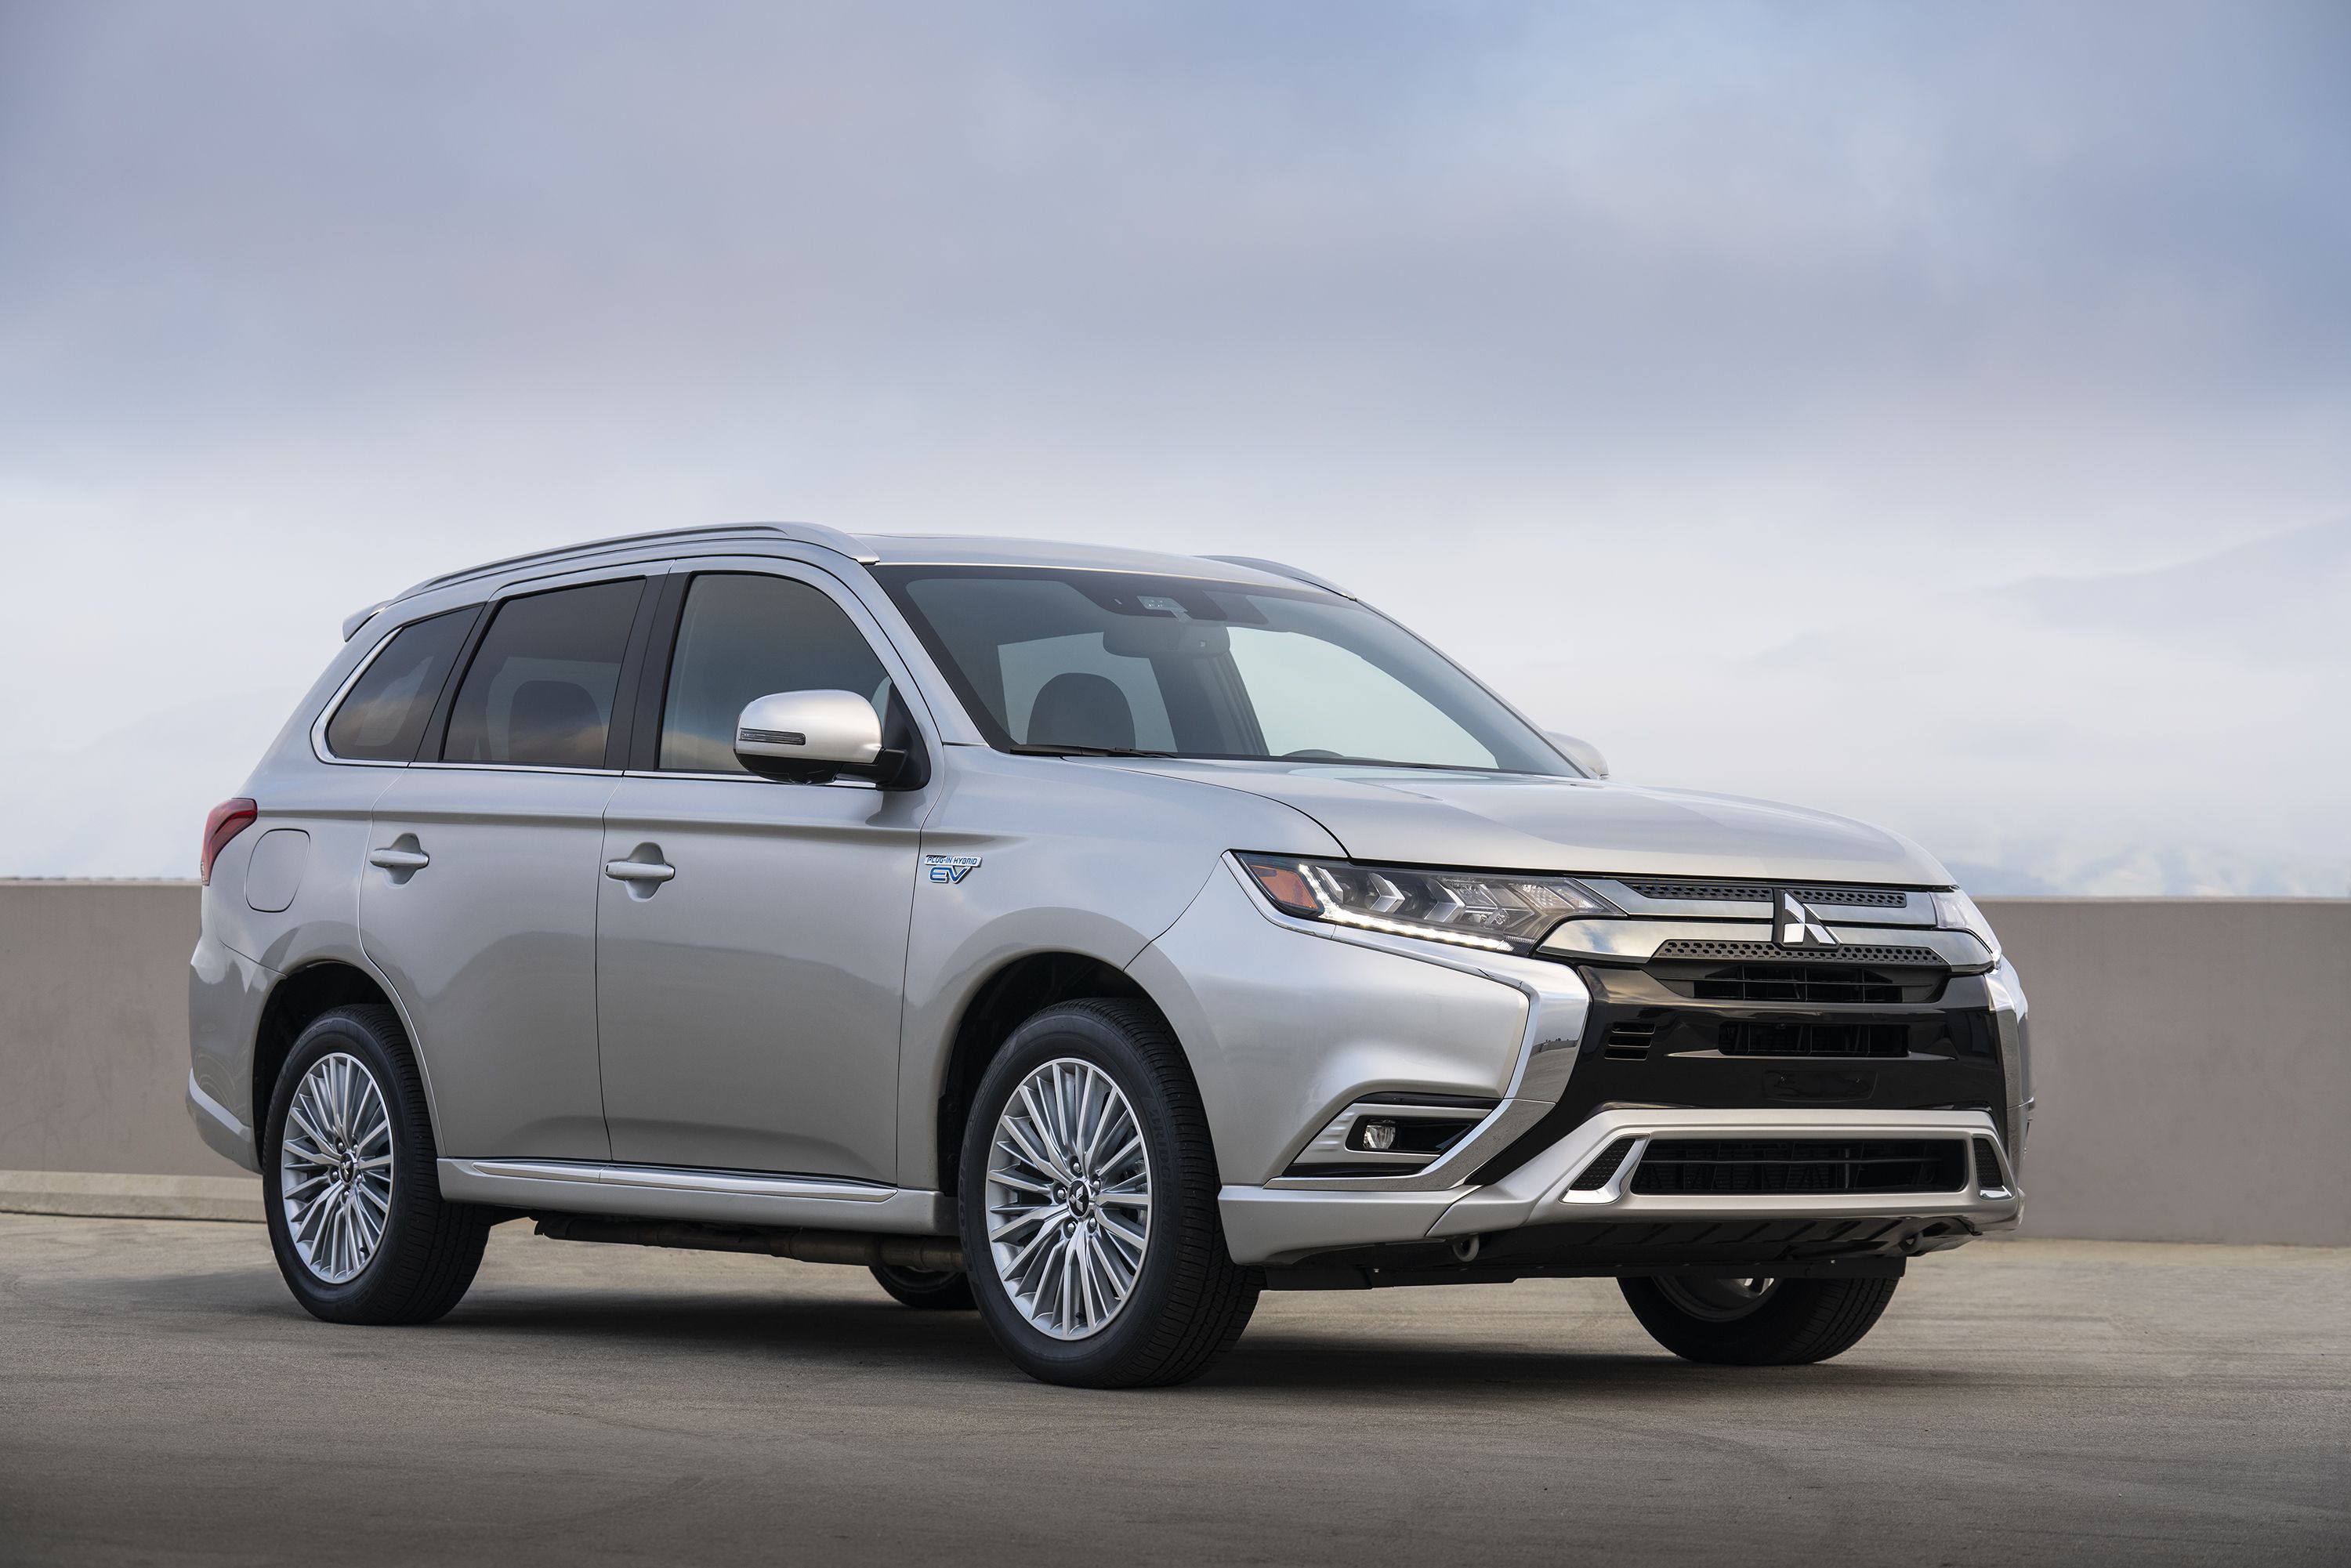 How many miles can i expect from a mitsubishi outlander 2021 Mitsubishi Outlander Review Pricing And Specs